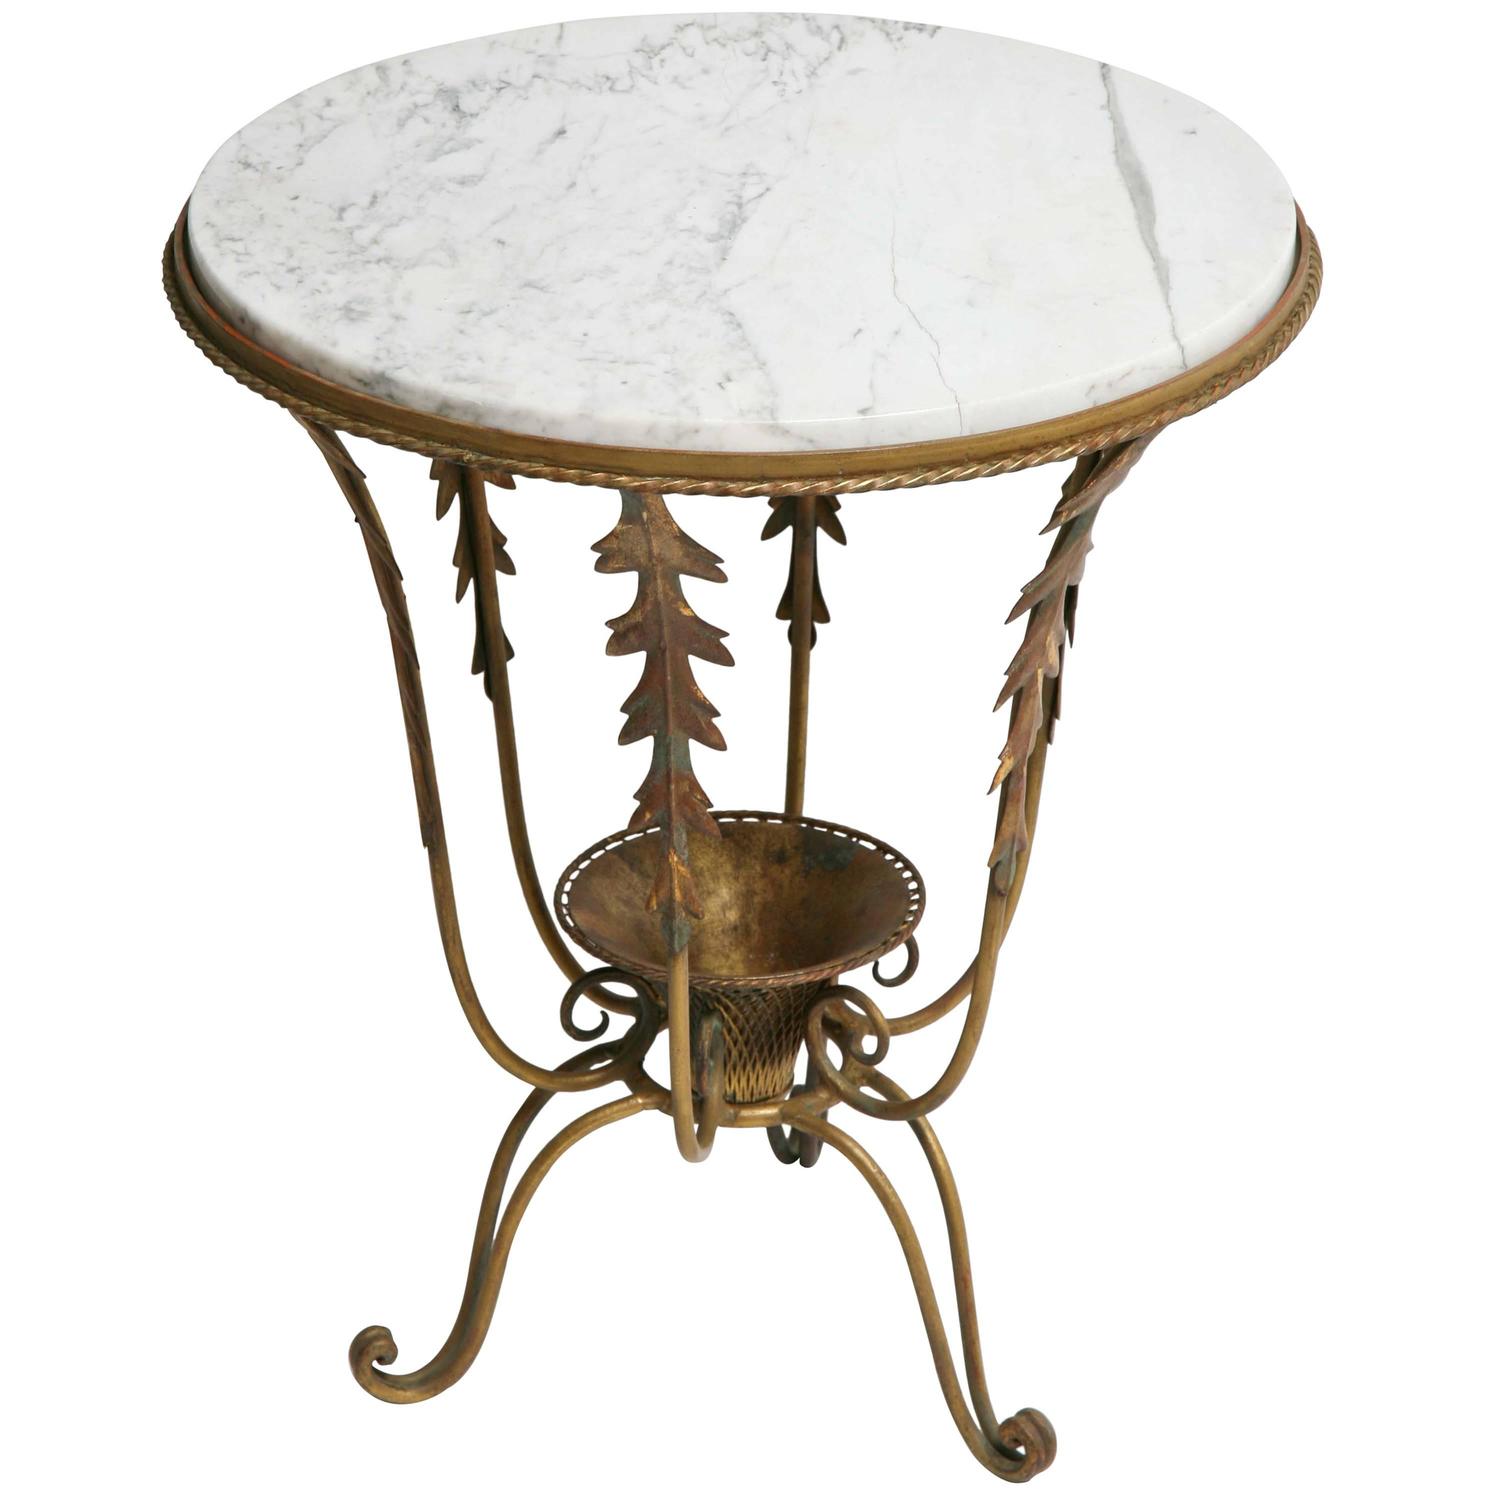 Hollywood Regency side table, mid-20th century